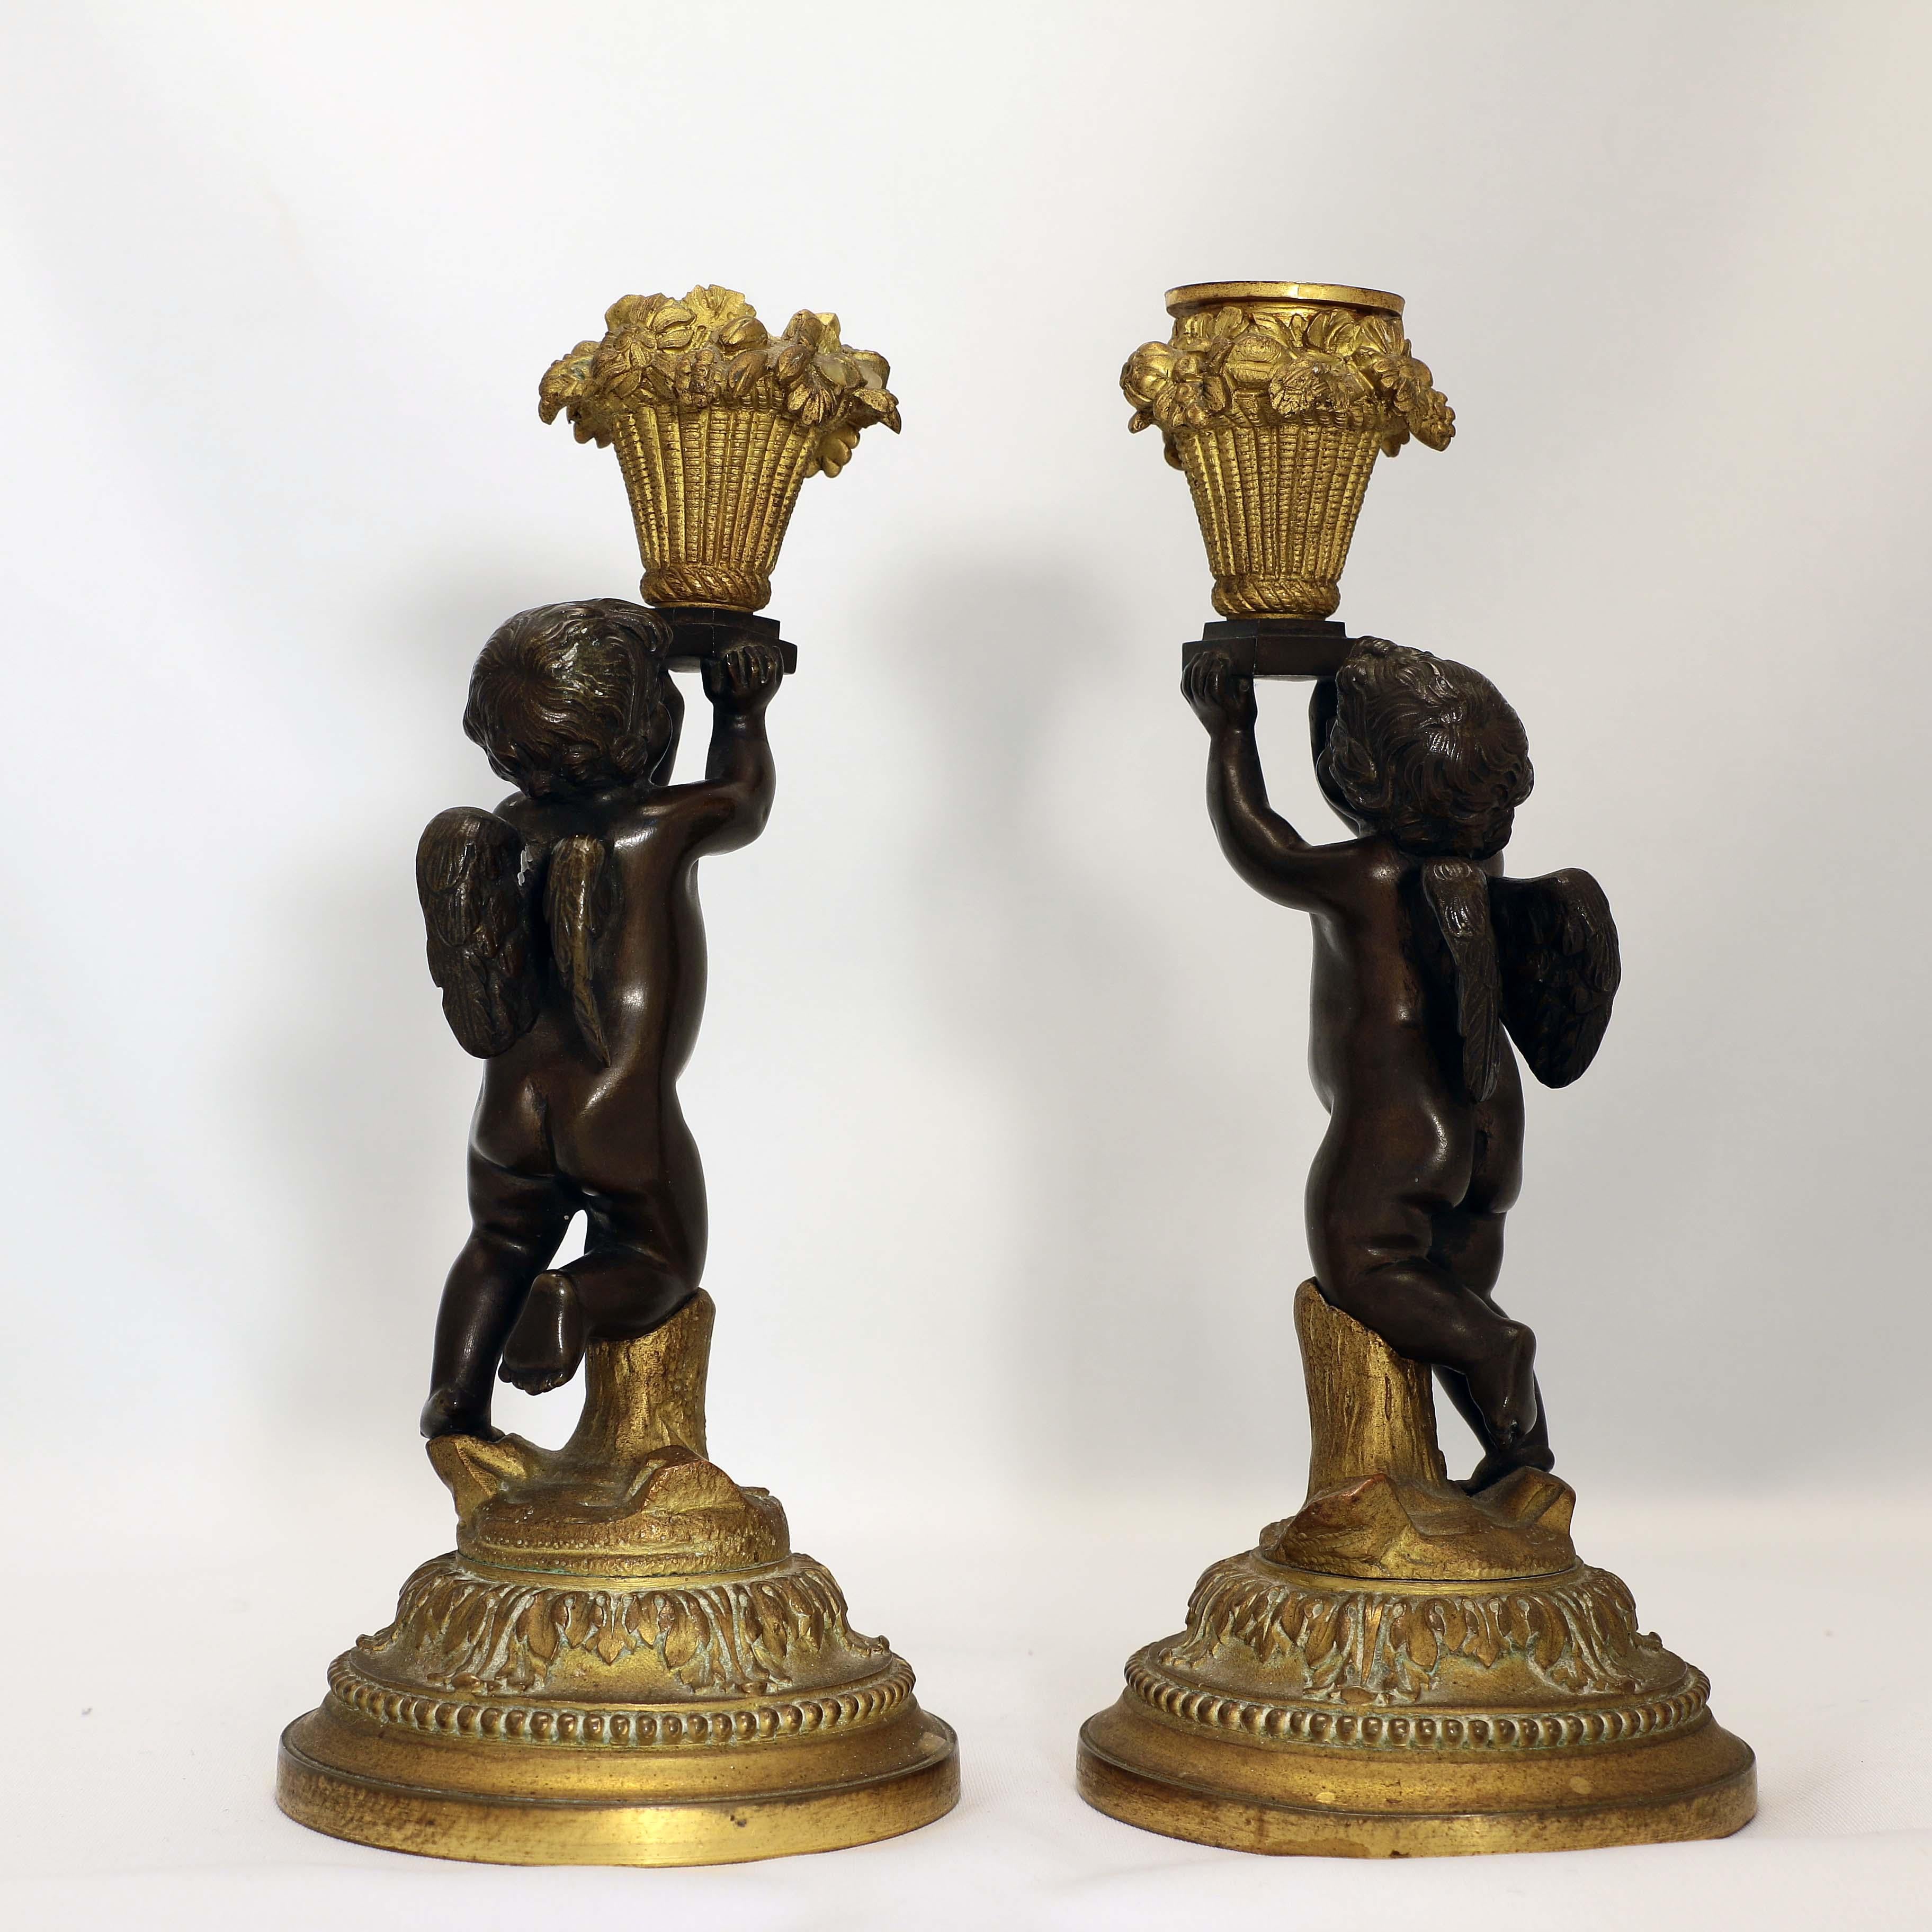 Cast Pair of French Louis XV Style Candlesticks, Modelled as Cherubs with Baskets